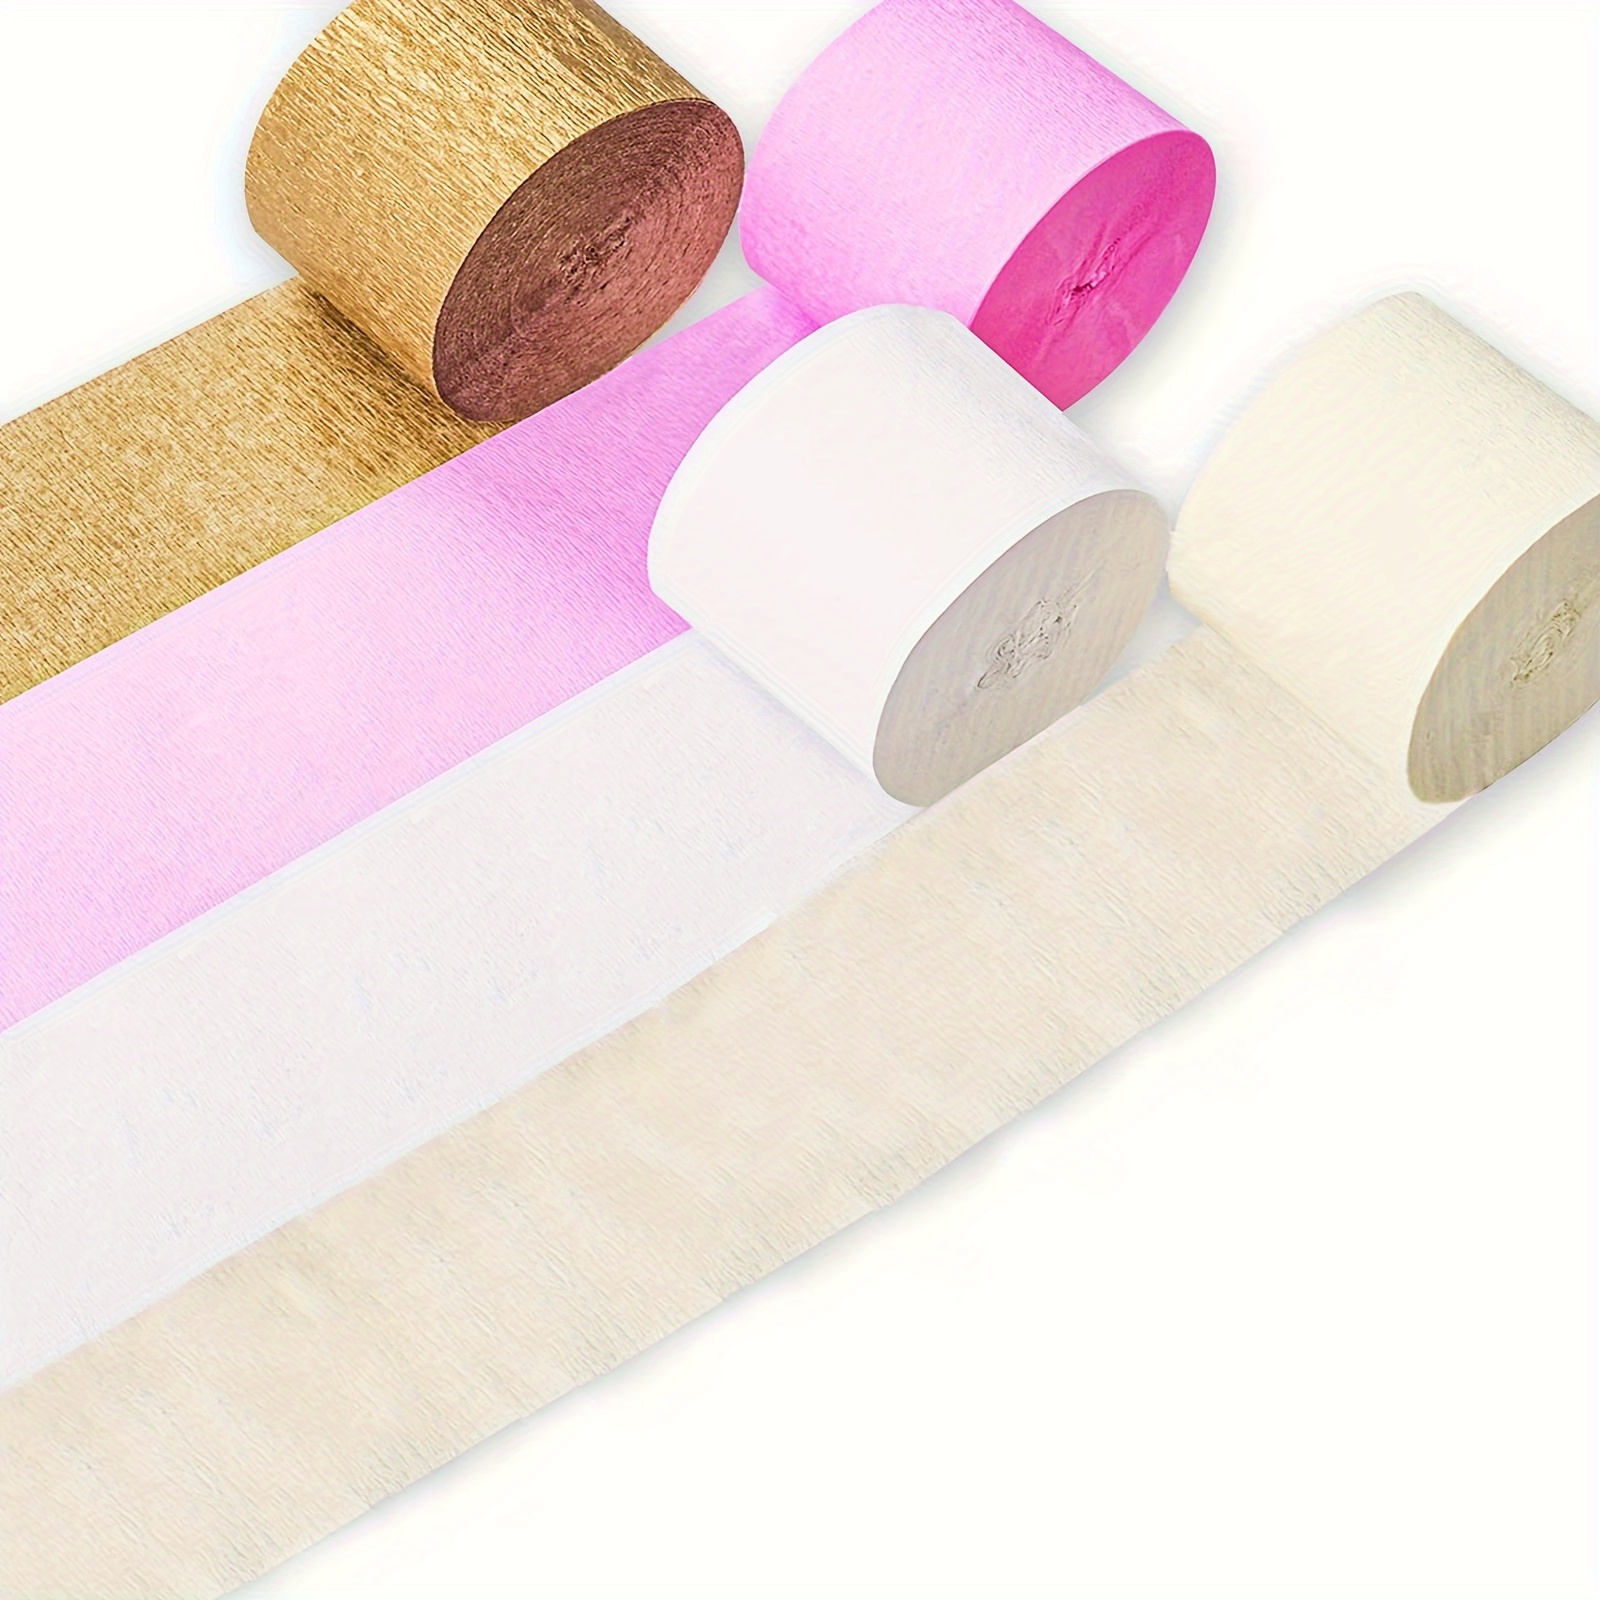 Crepe Paper Streamers Party Streamers In 6 Pastel Colors For